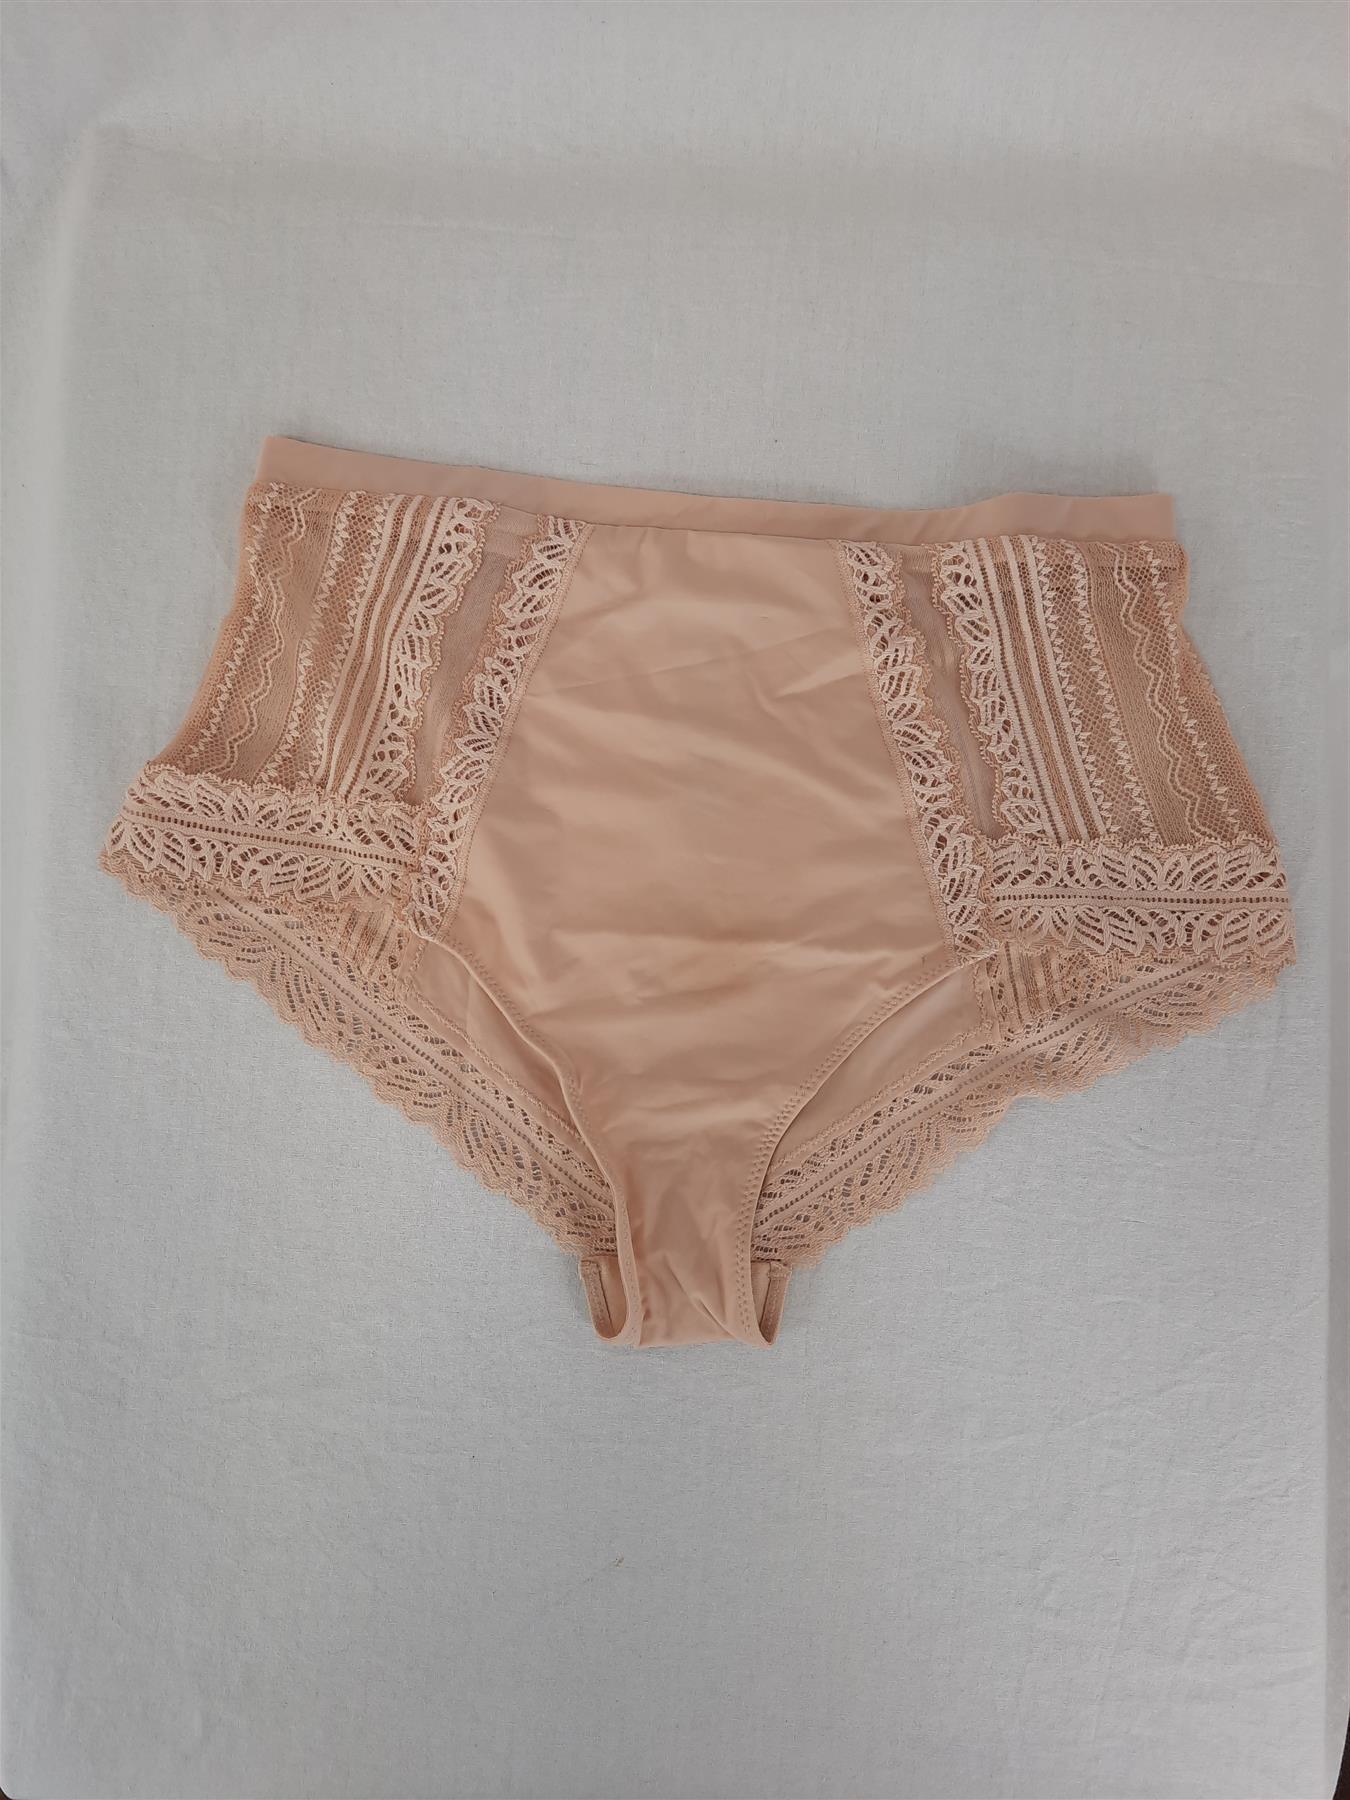 Women's Classic Lace Knickers Full Brief Sustainable Fabric Brand New